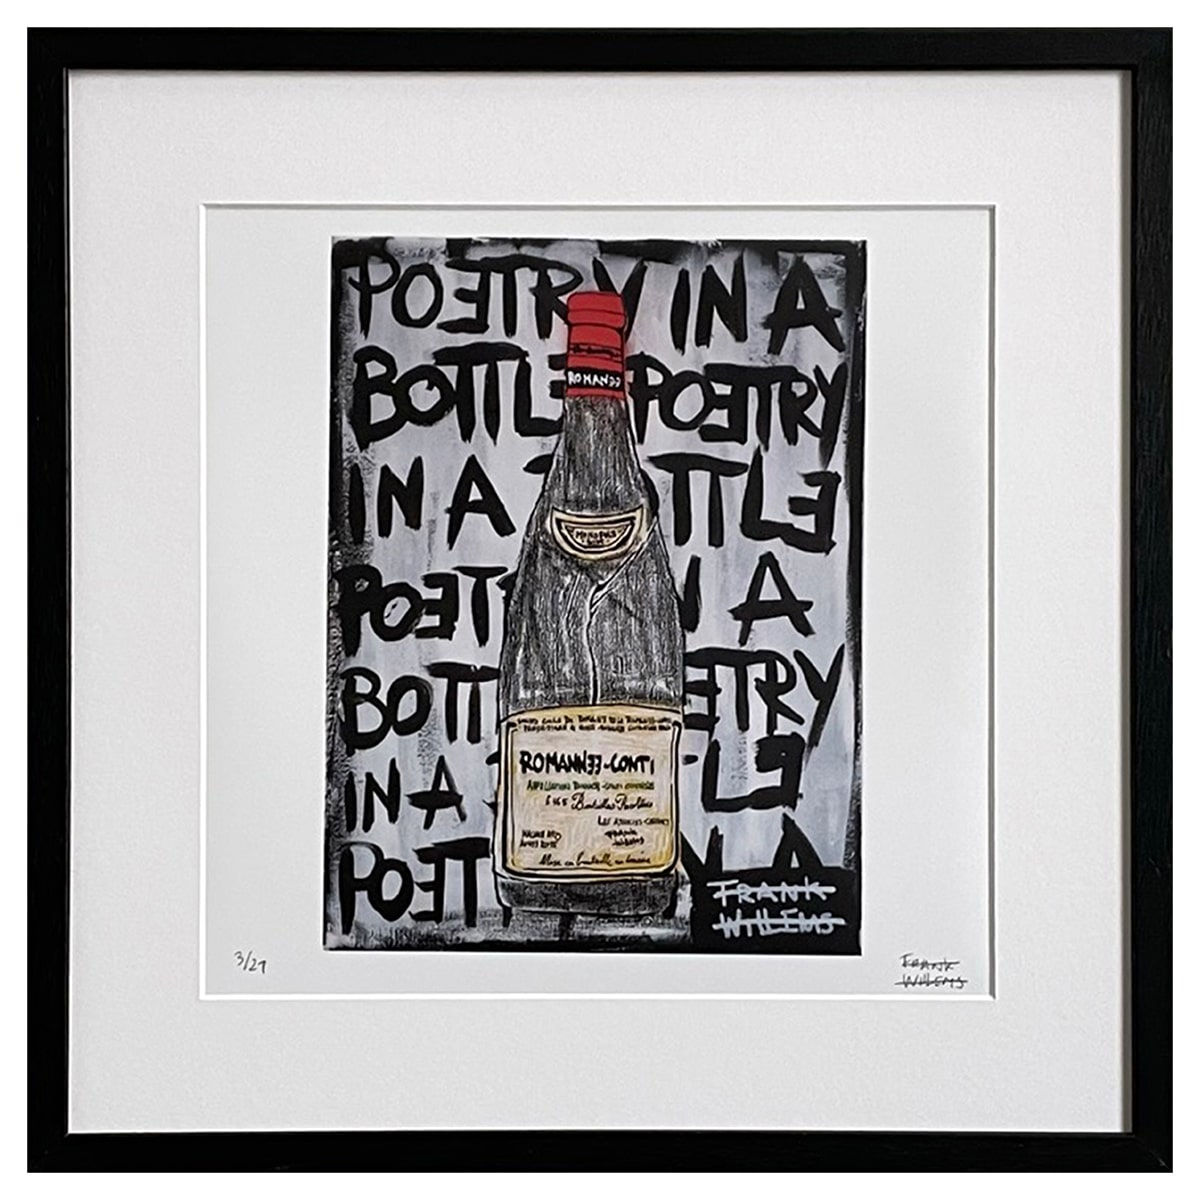 Limited Edt Art Prints - ROMANEE-CONTI - POETRY IN A BOTTLE - Frank Willems